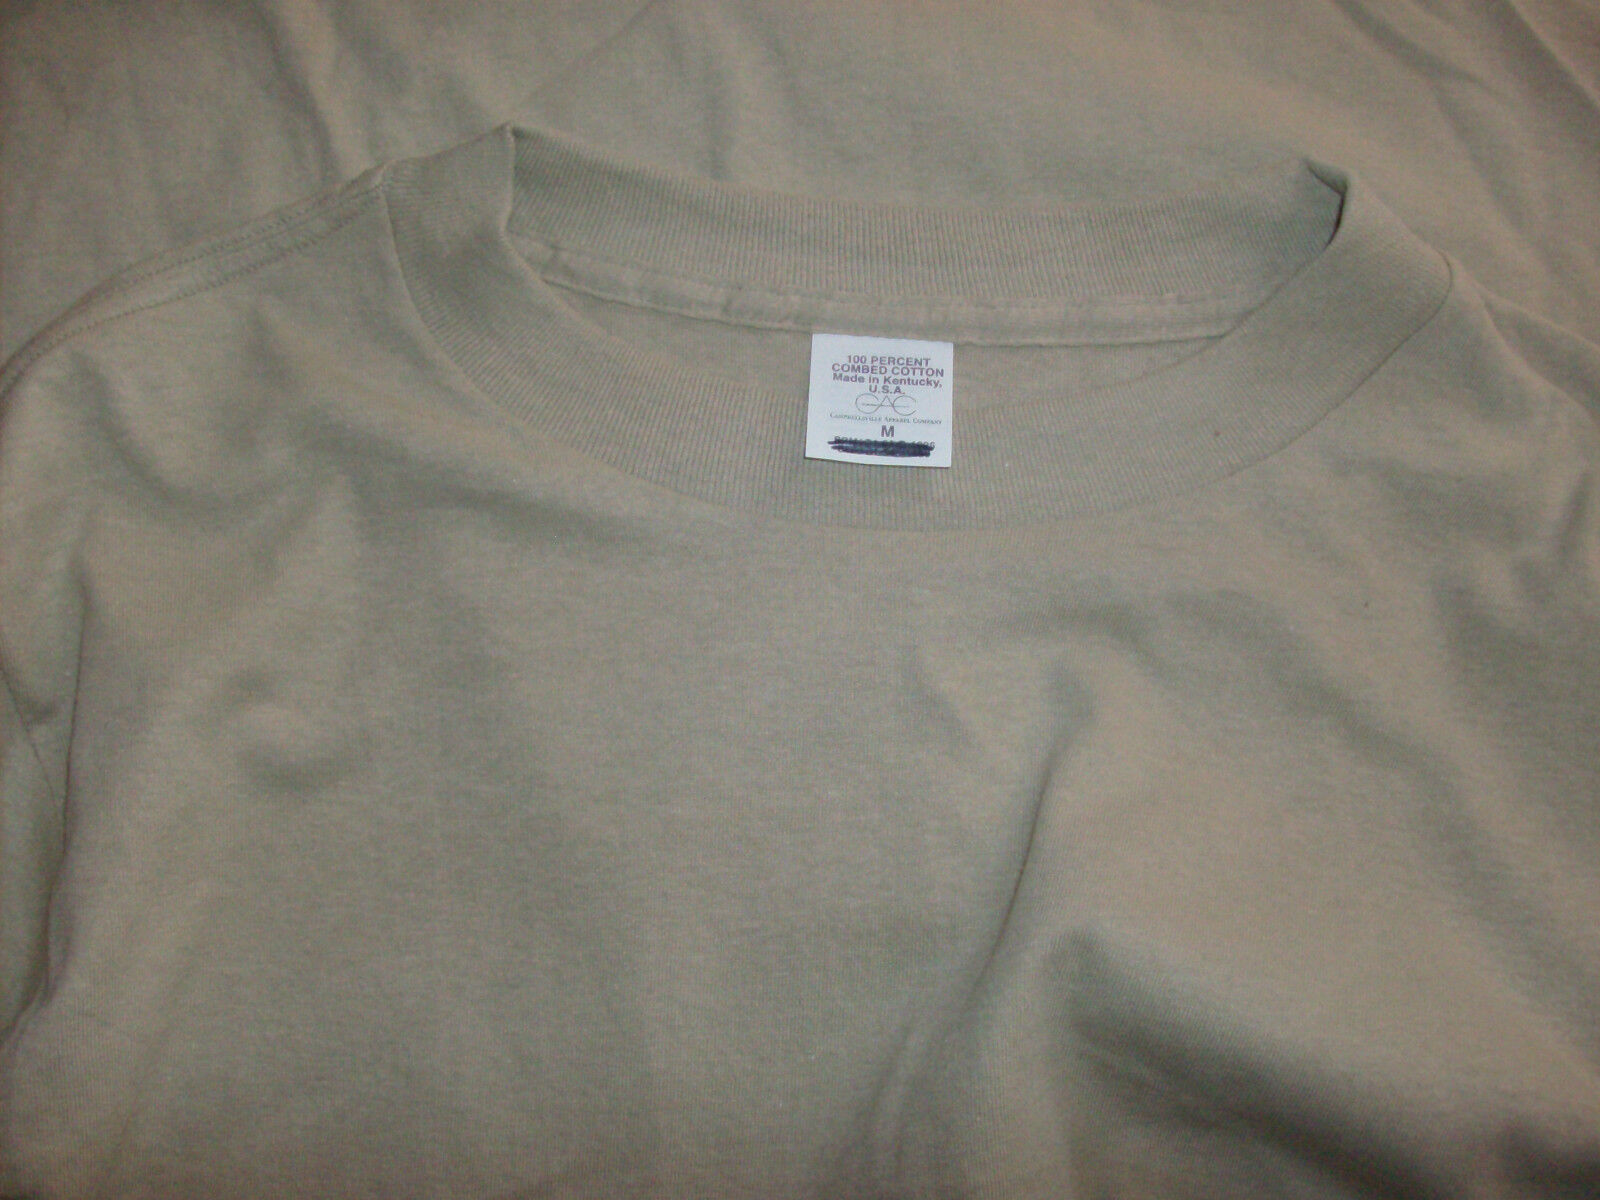 Campbellsville Apparel Crew Neck Sand Colored T-Shirts Mens Med 100% Cotton  USA